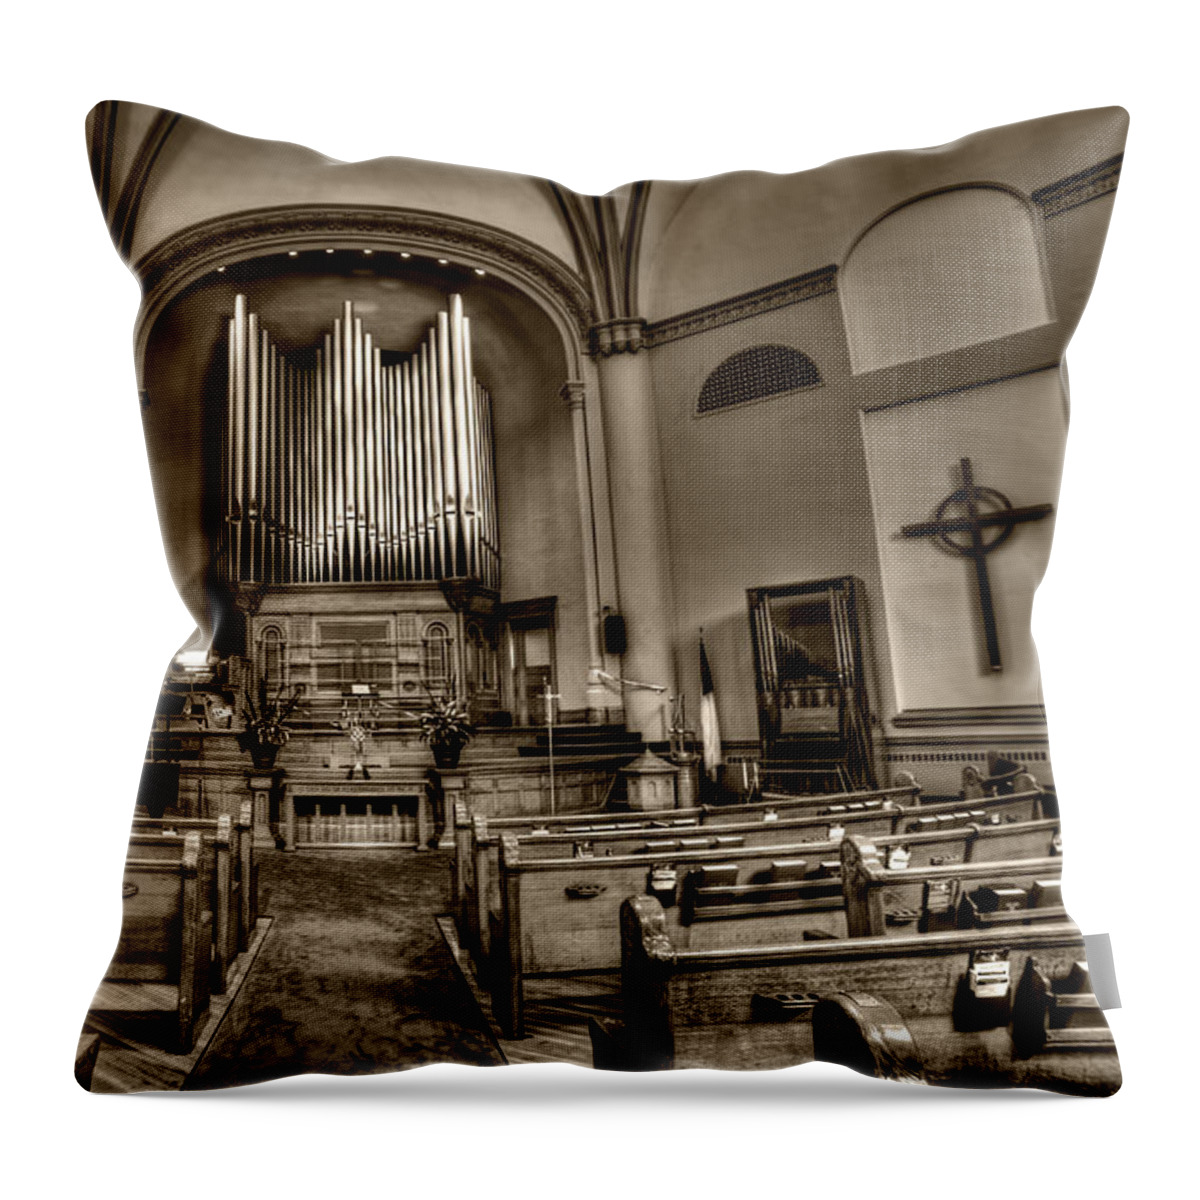 Mn Church Throw Pillow featuring the photograph Central Presbyterian Church #3 by Amanda Stadther